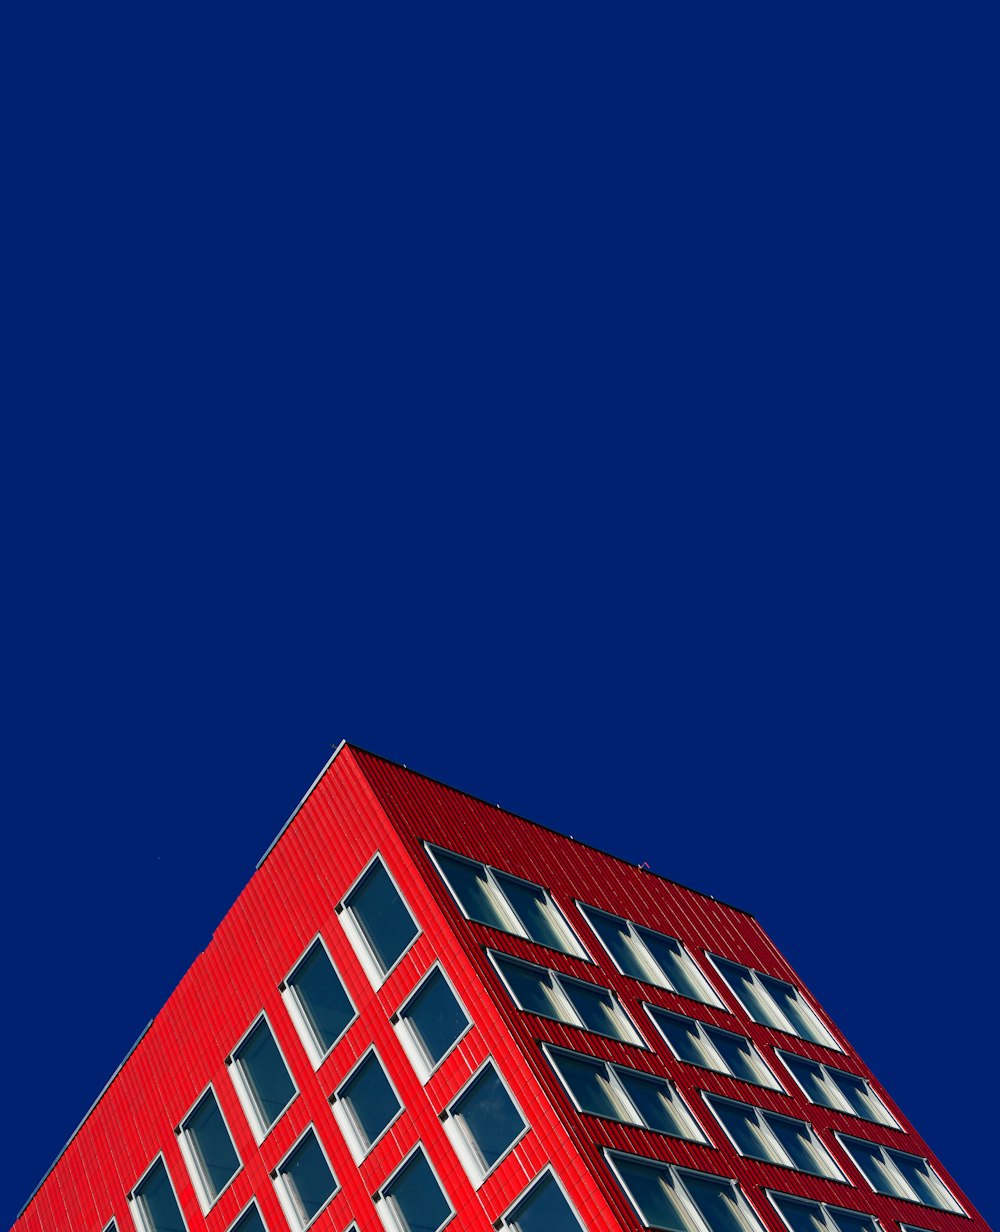 worm's eyeview of red building